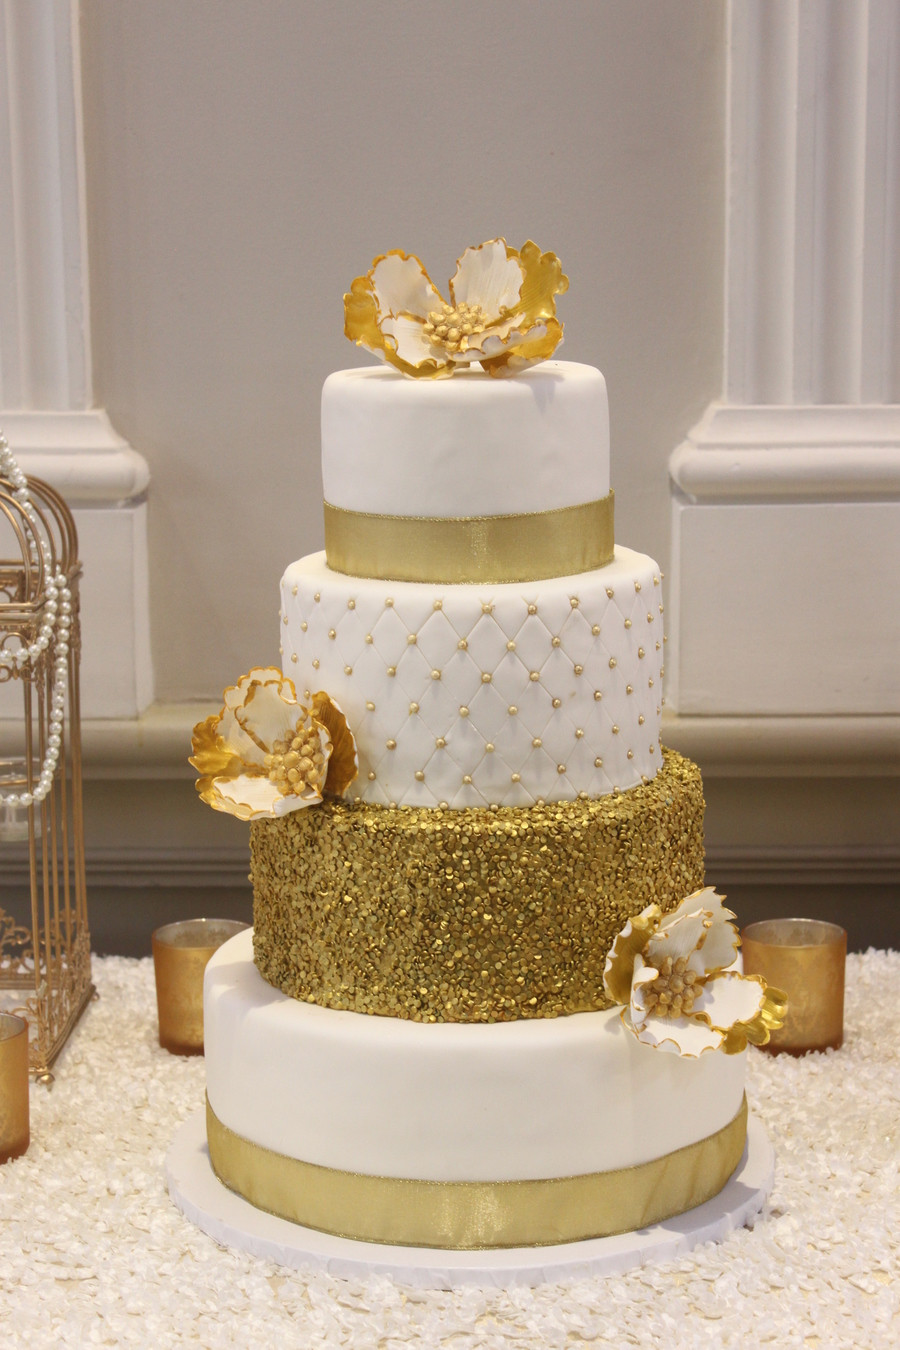 Wedding Cake White And Gold
 Gold Glamour Wedding Cake CakeCentral